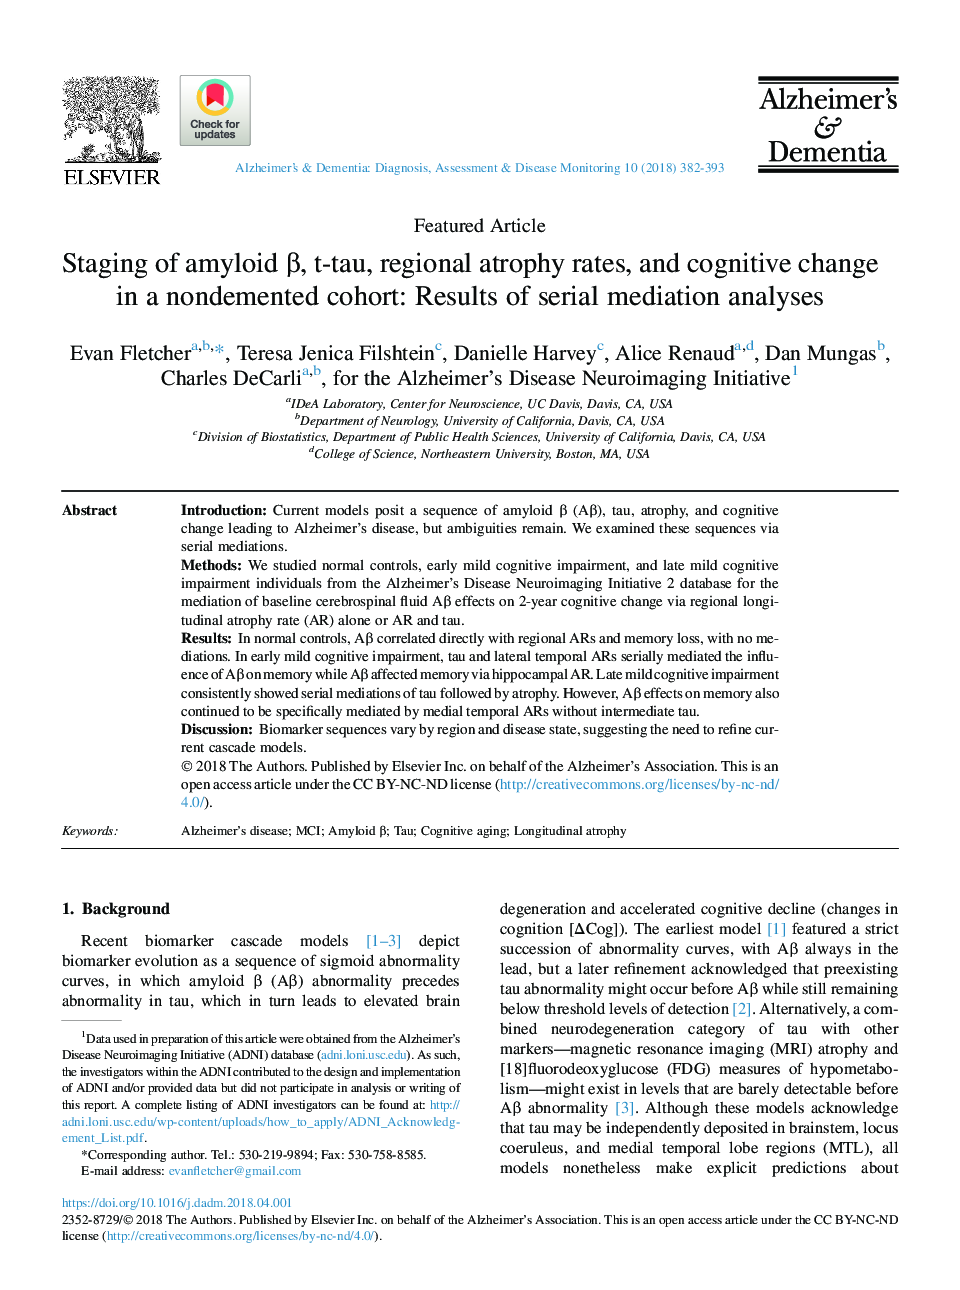 Staging of amyloid Î², t-tau, regional atrophy rates, and cognitive change in a nondemented cohort: Results of serial mediation analyses